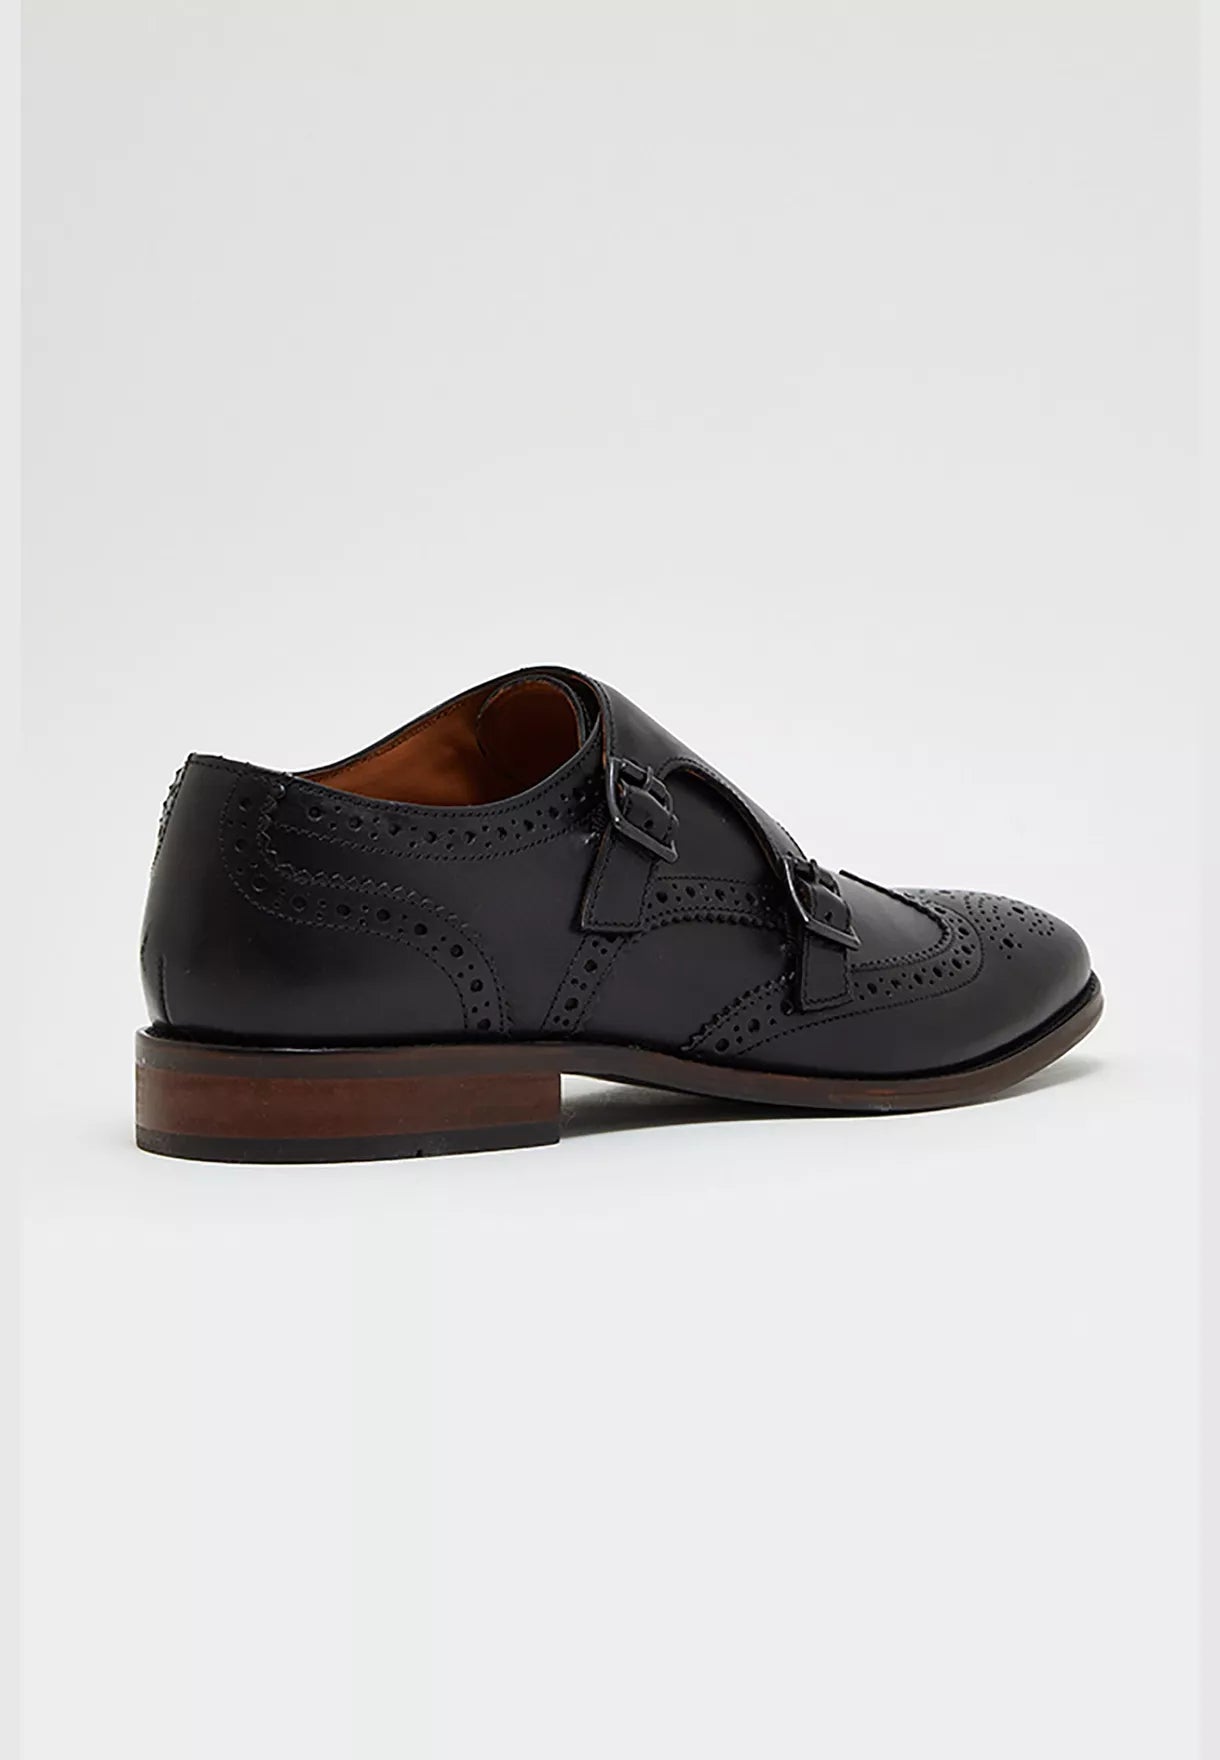 Leather Formal Shoes With Buckle Closure